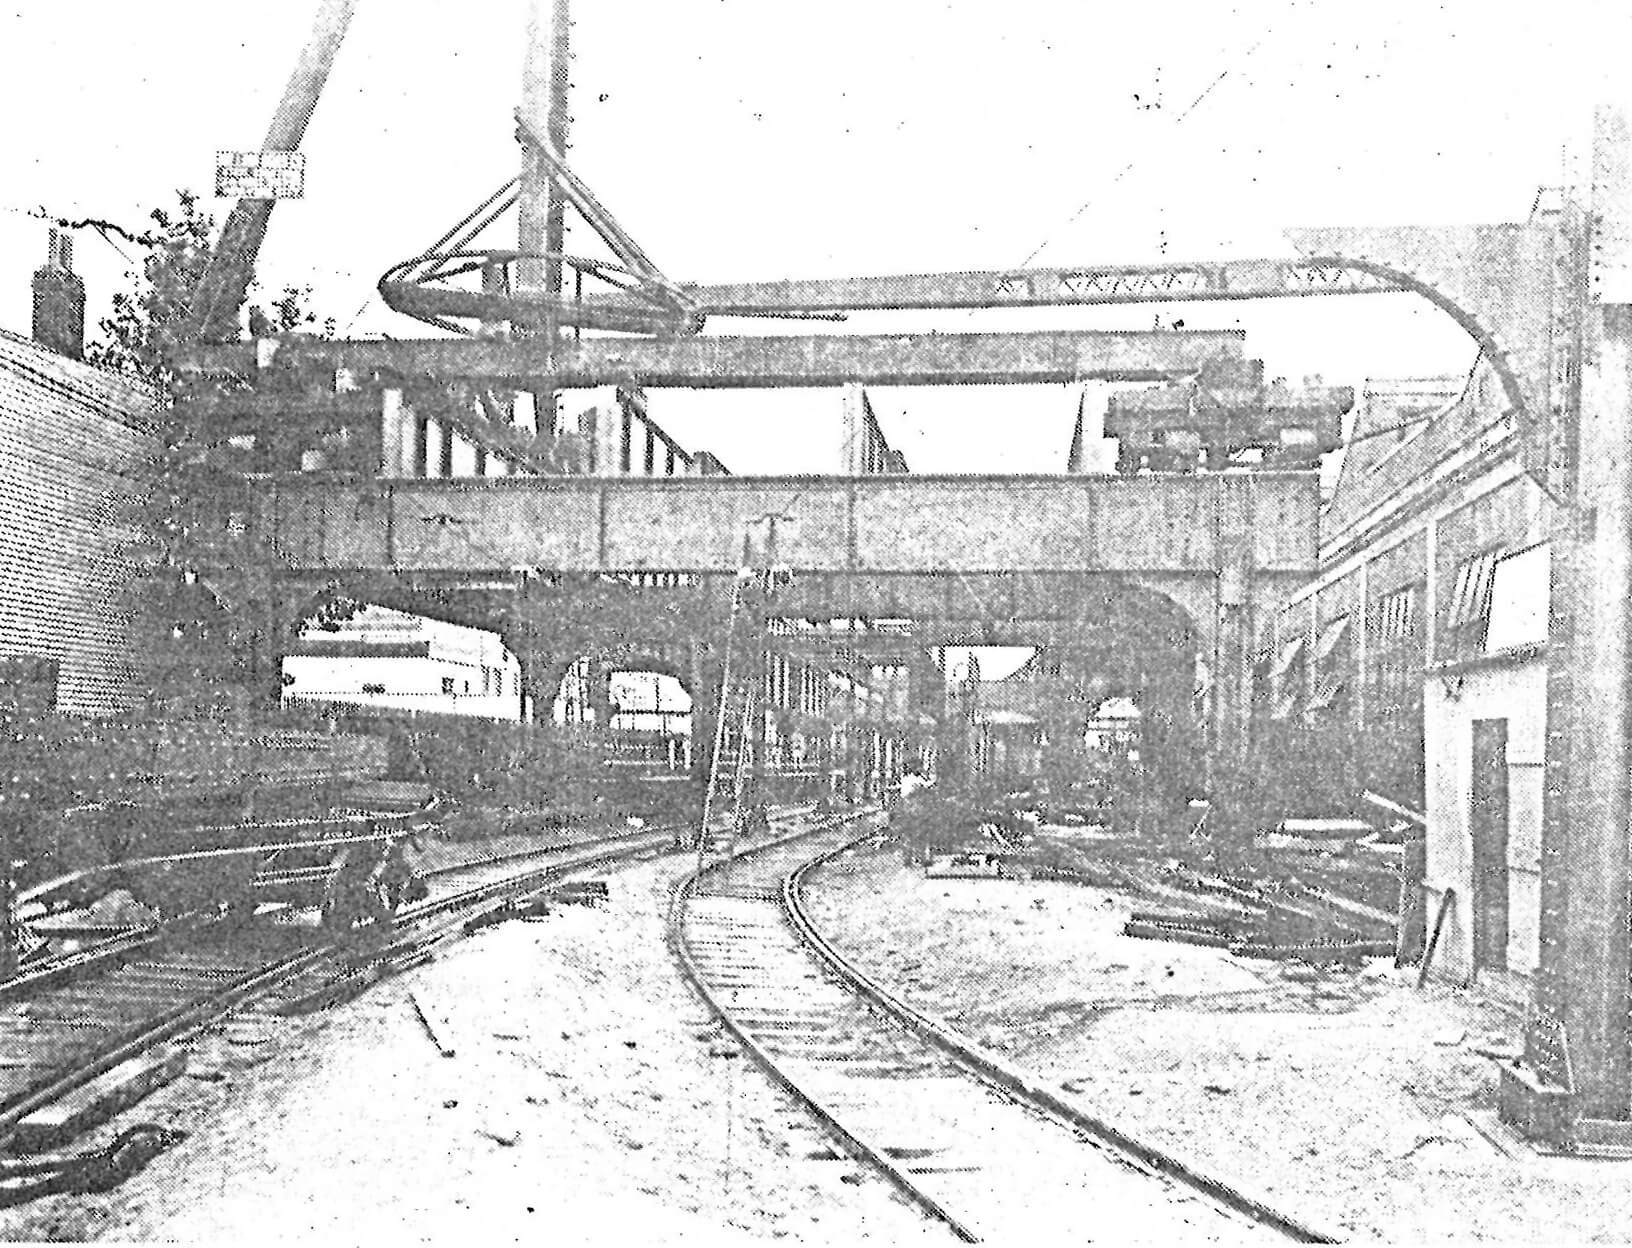 This photo taken in October 1914 shows the Myrtle Avenue Line being erected in Ridgewood